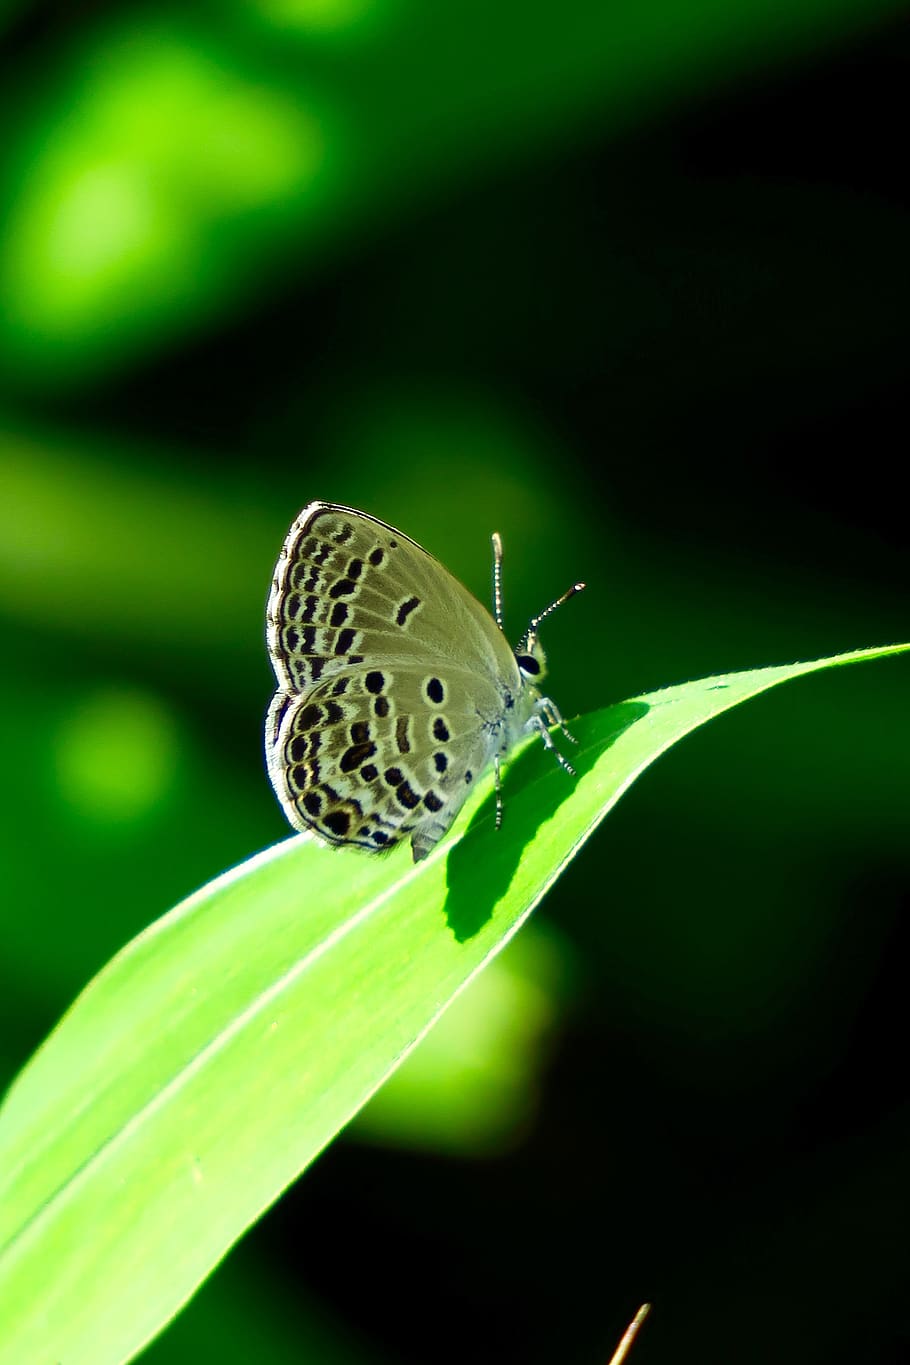 butterfly, quentin chong, green, summer, close-up, spots stripes, insect, nature, animal wildlife, animal themes